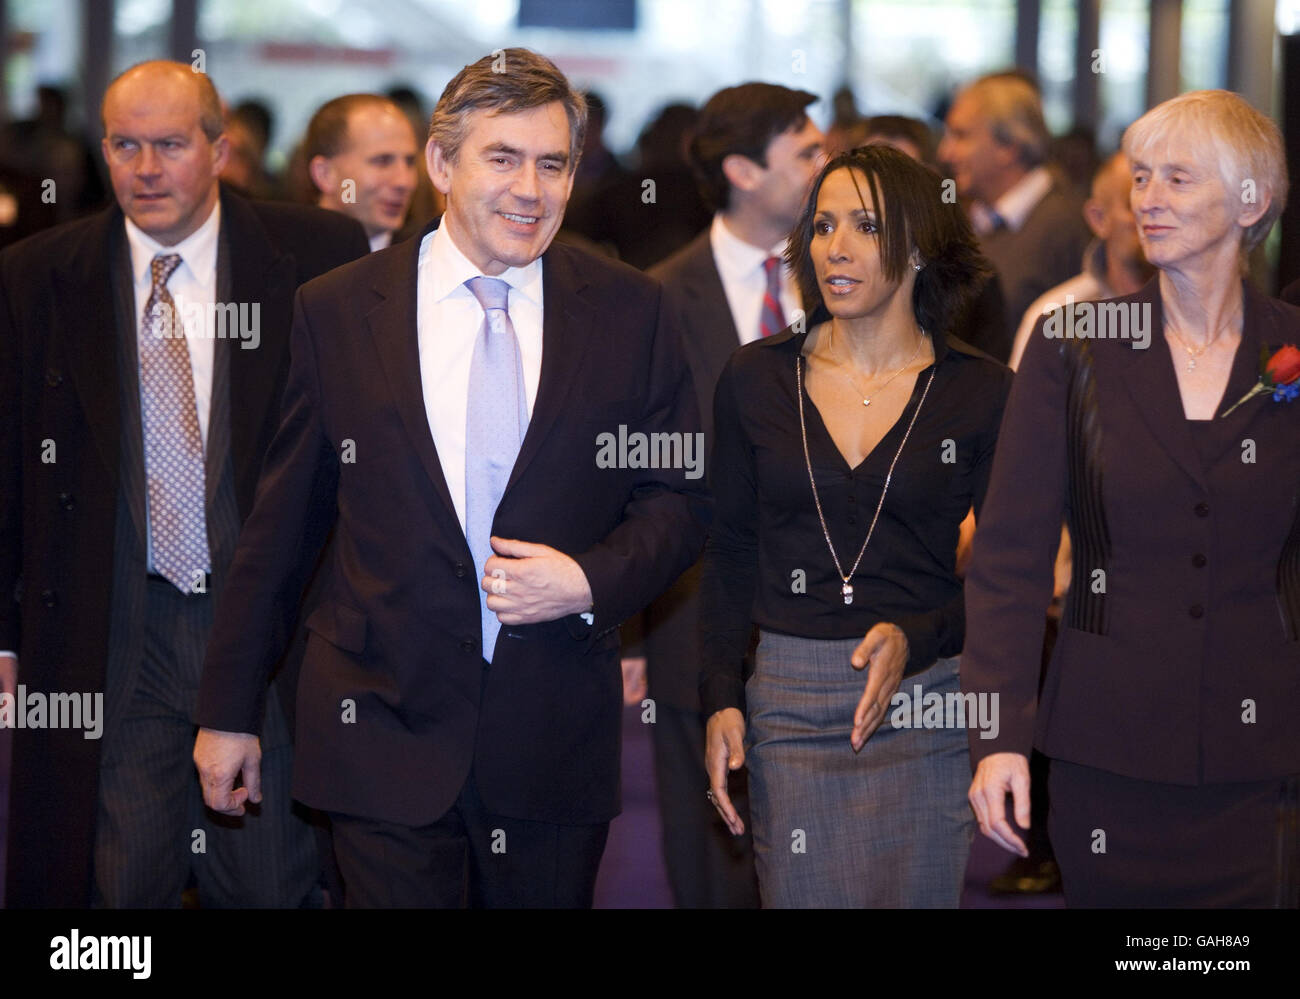 Prime Minister Gordon Brown and Kelly Holmes, National Schools Sports Champion, arrive at The Youth Sports Trust Conference at the Telford International Conference Centre. Stock Photo